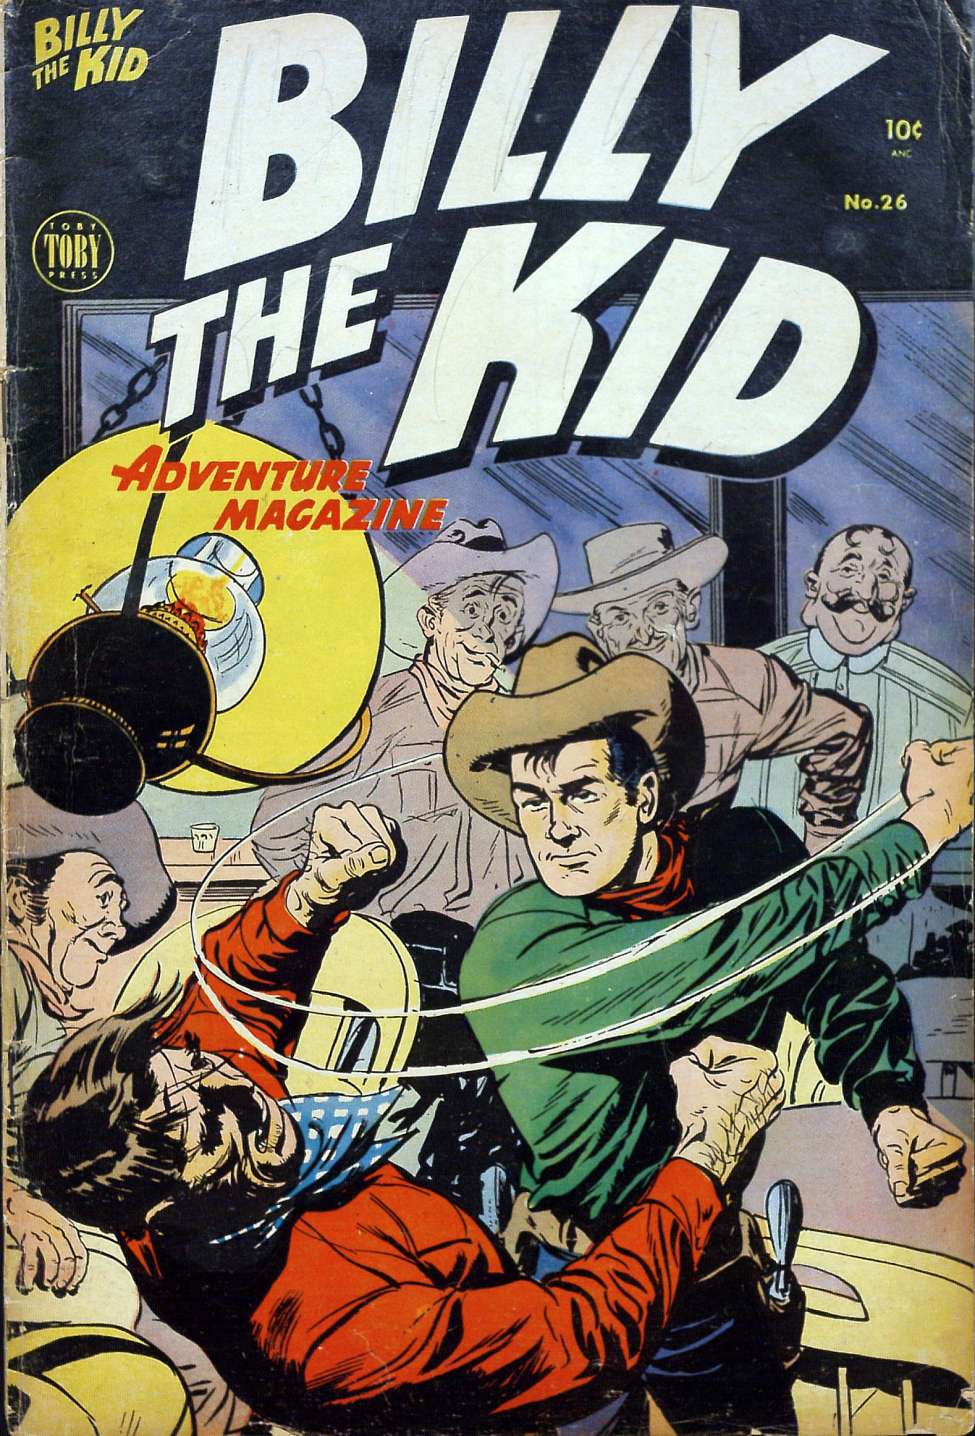 Book Cover For Billy the Kid Adventure Magazine 26 - Version 1